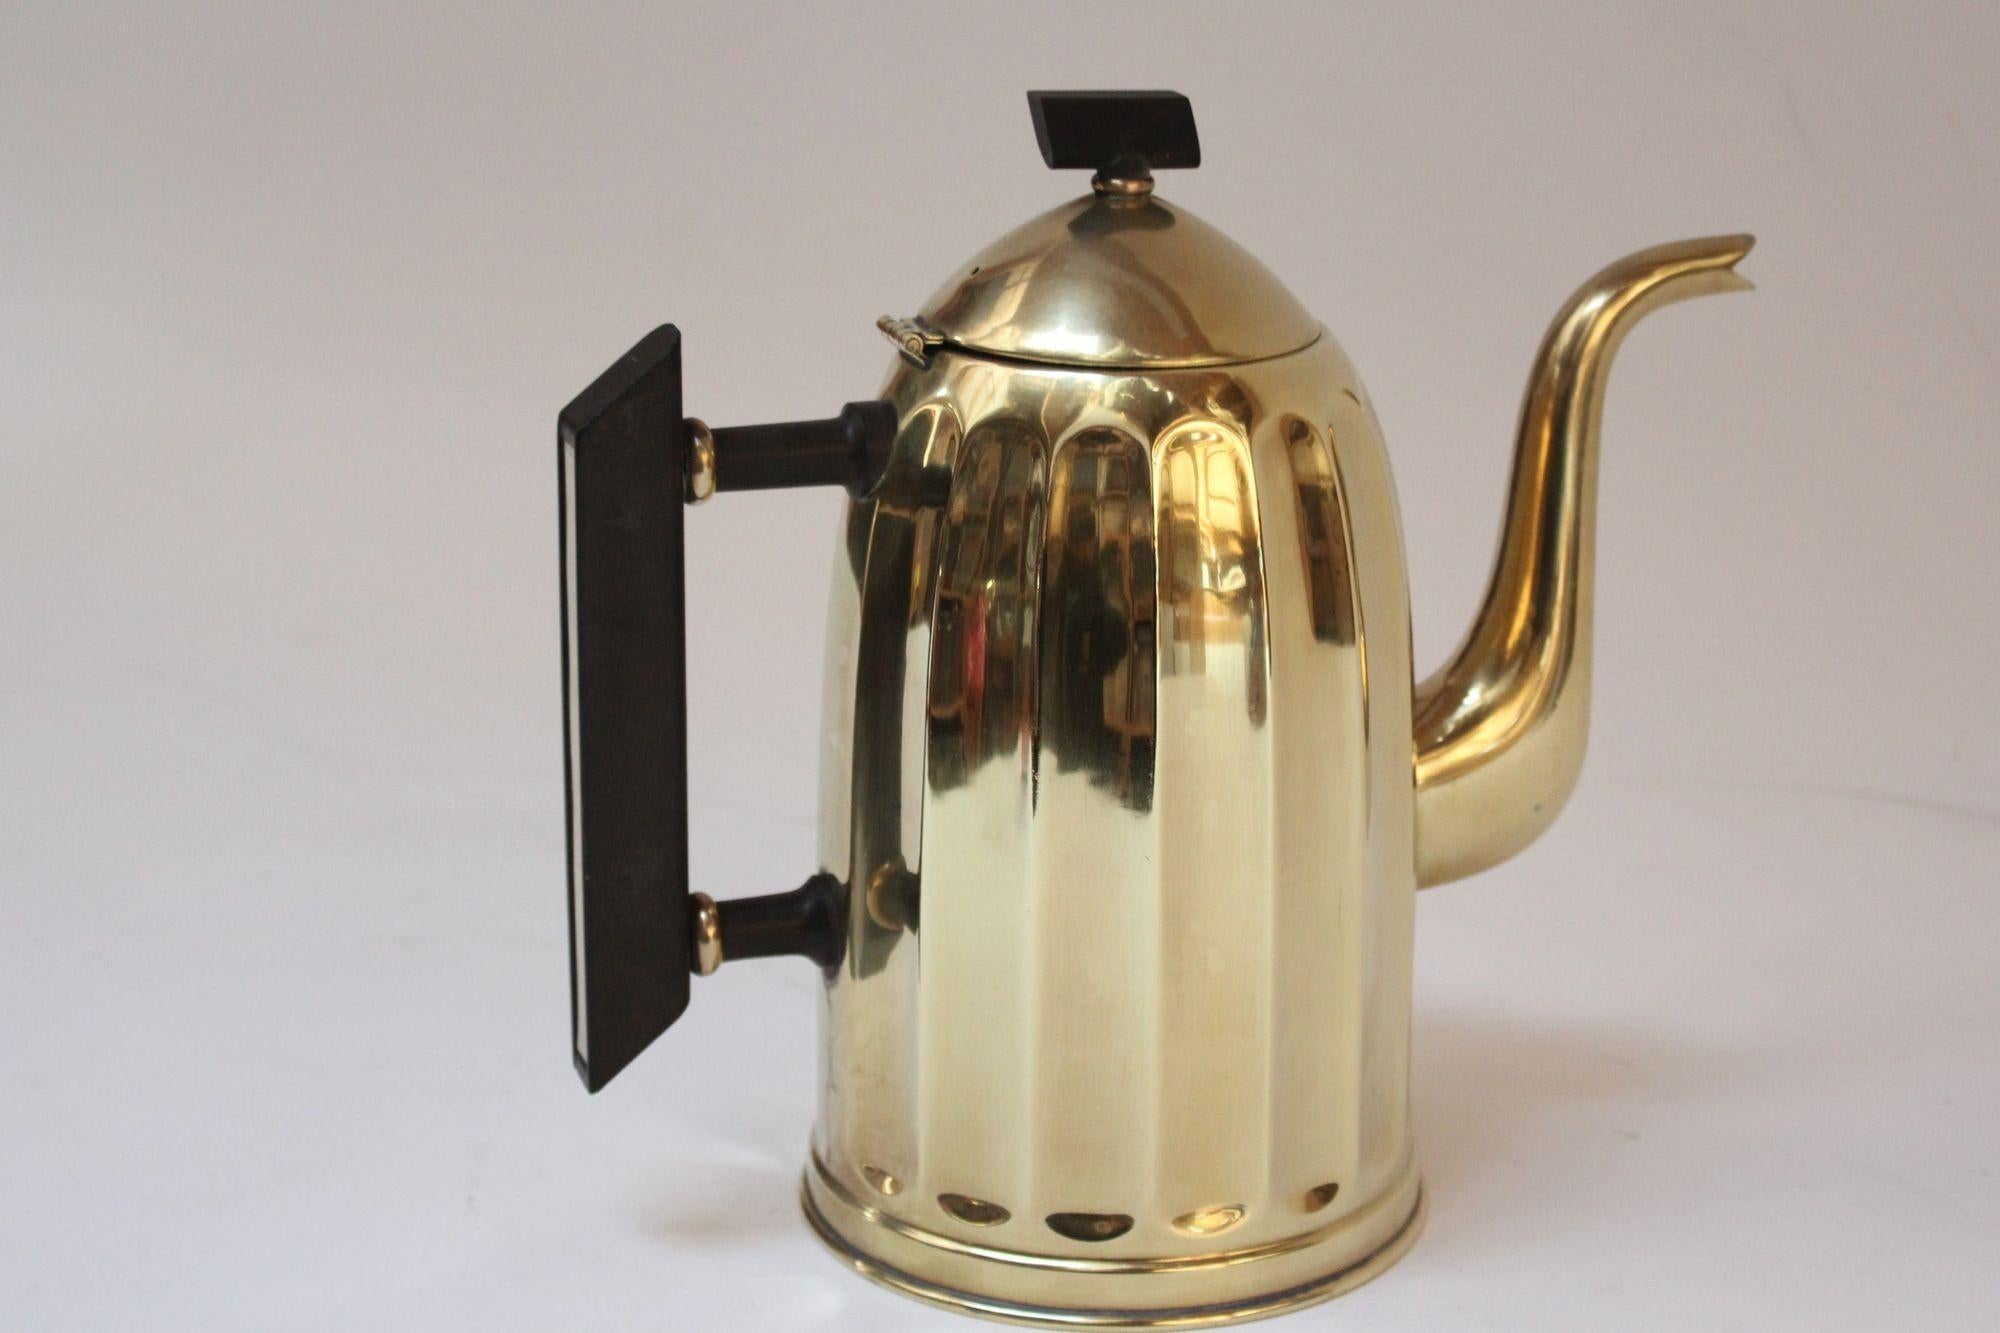 Sculptural Art Deco tea/coffee pot by Demeyere (ca. late 1930s/early 1940s, Belgium).
Scarcely seen brass example with black bakelite accents (the chrome-plated version is more common).
Newly polished condition, though light wear/tarnish remains, as